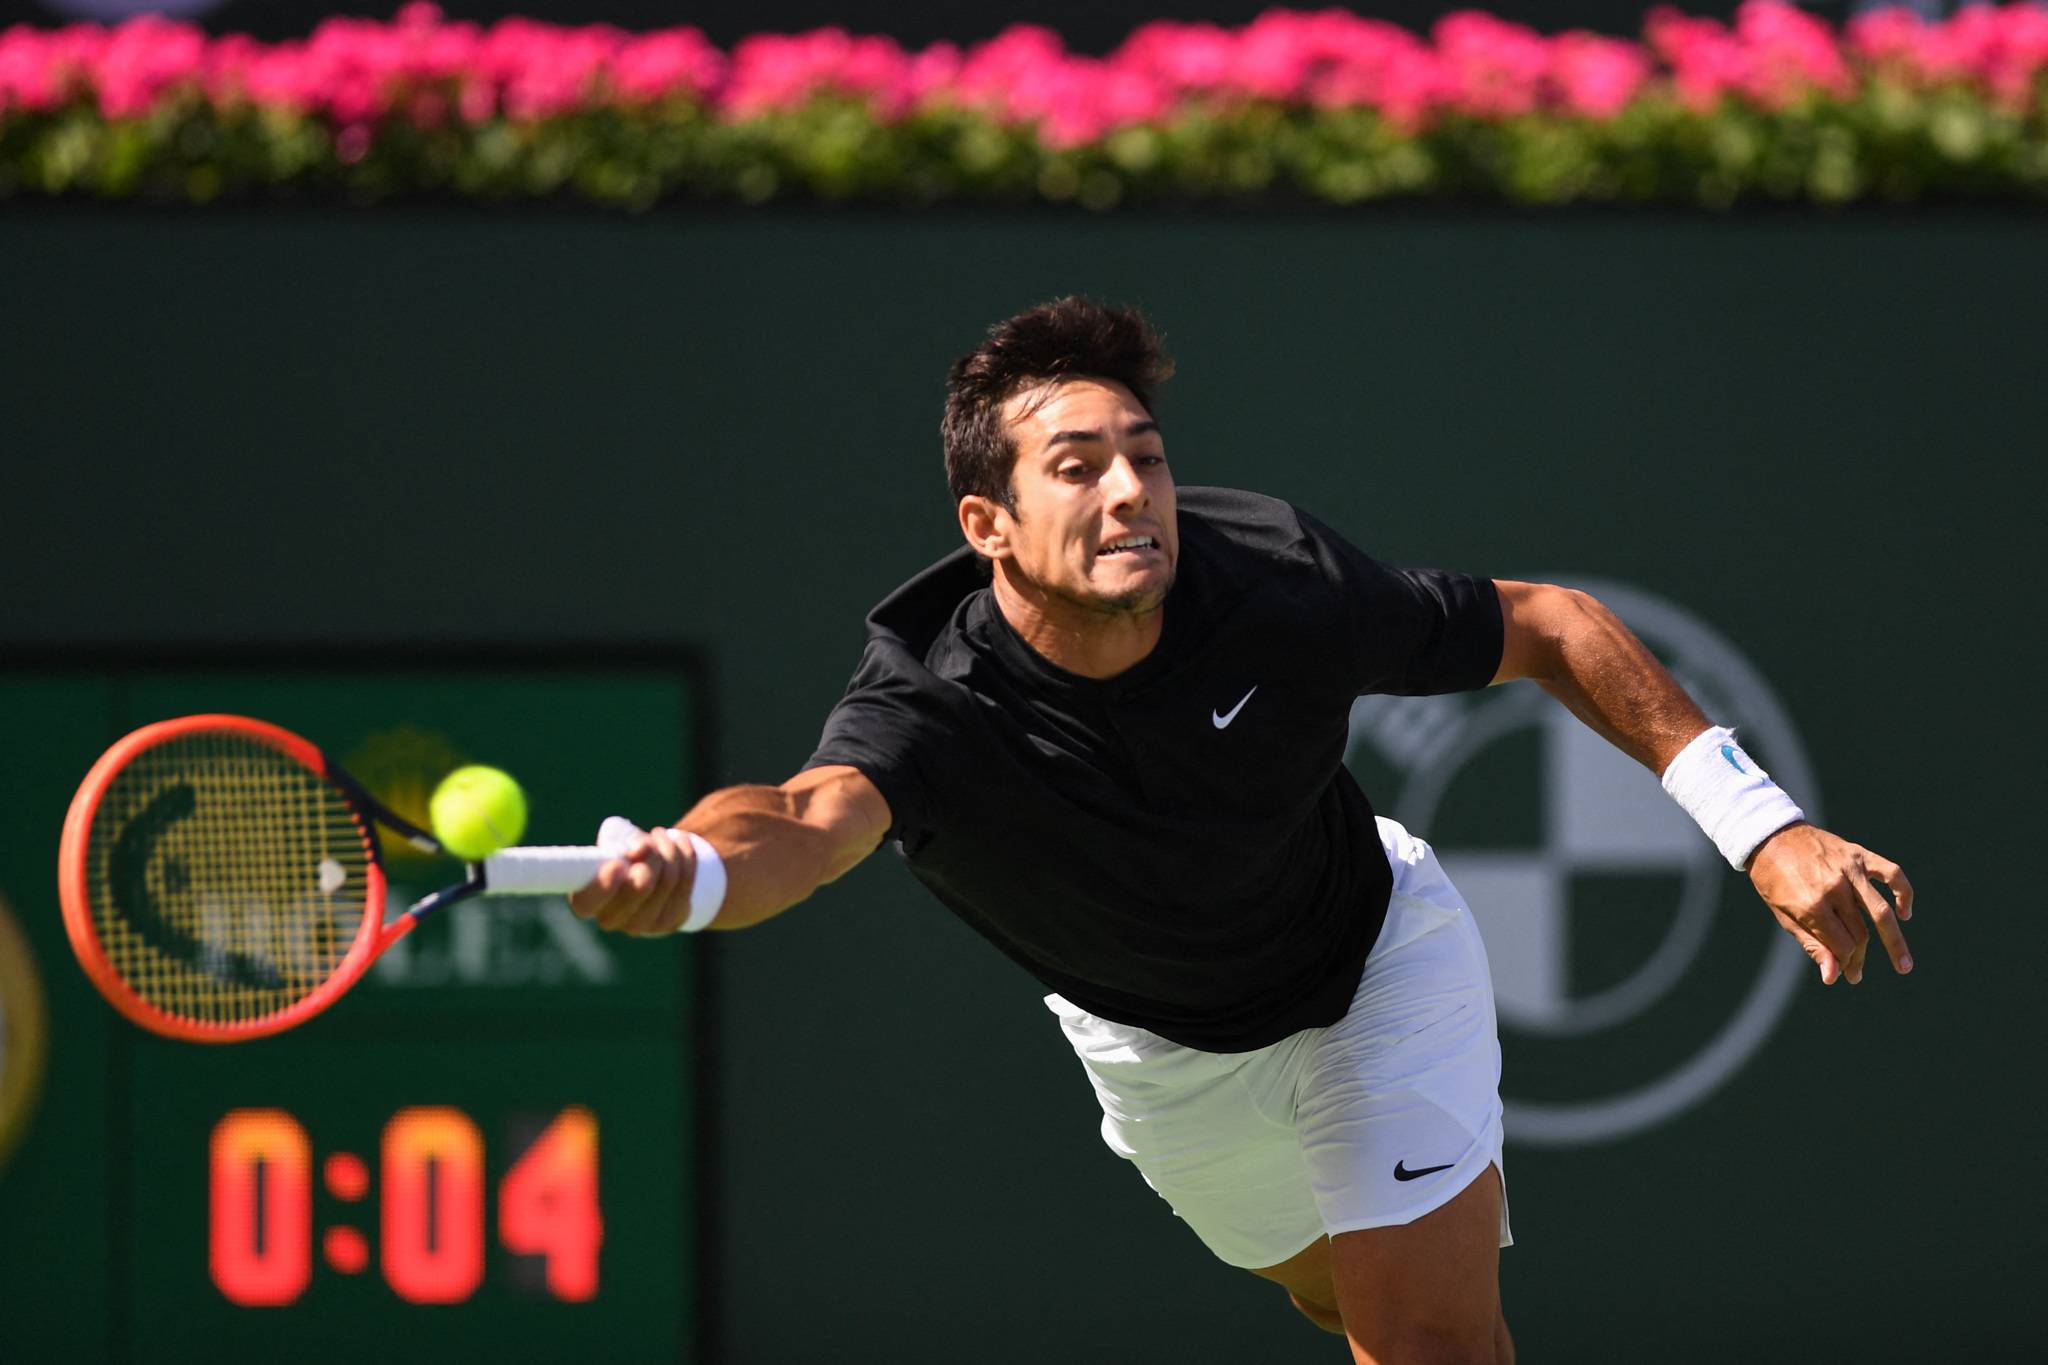 Garin stuns Ruud to reach last 16 at Indian Wells